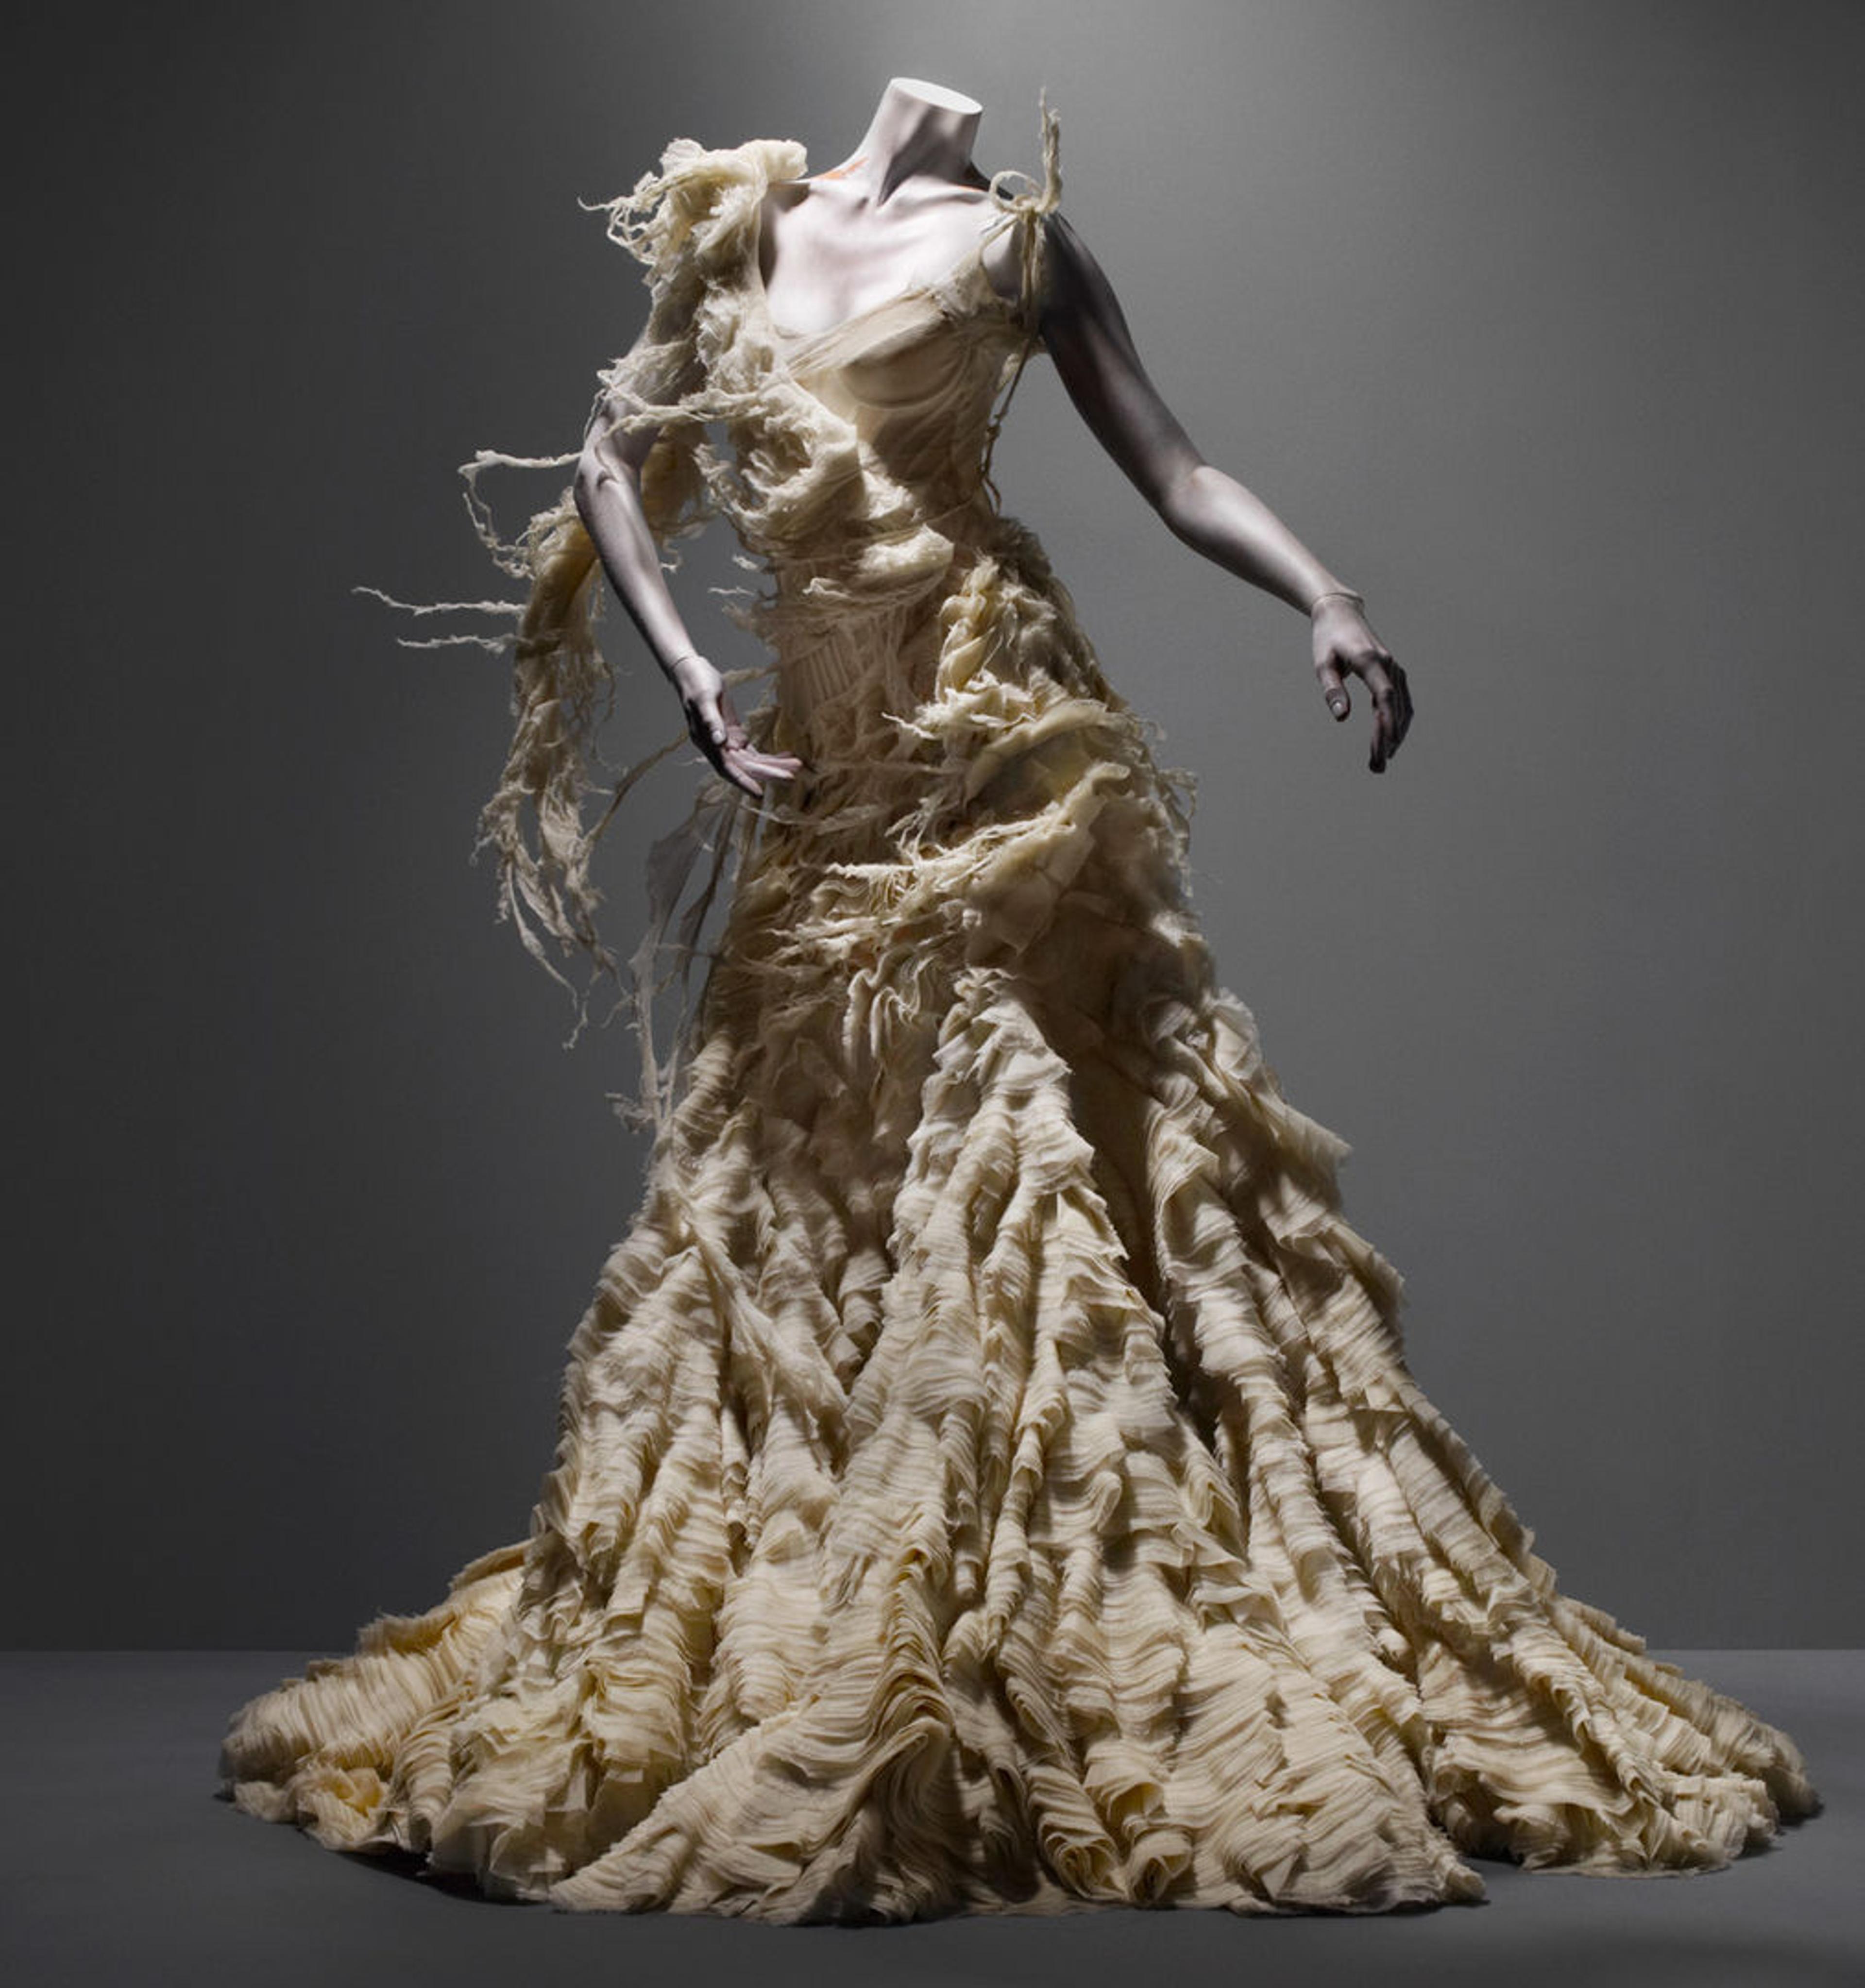 A couture gown by Alexander McQueen against a dark grey background